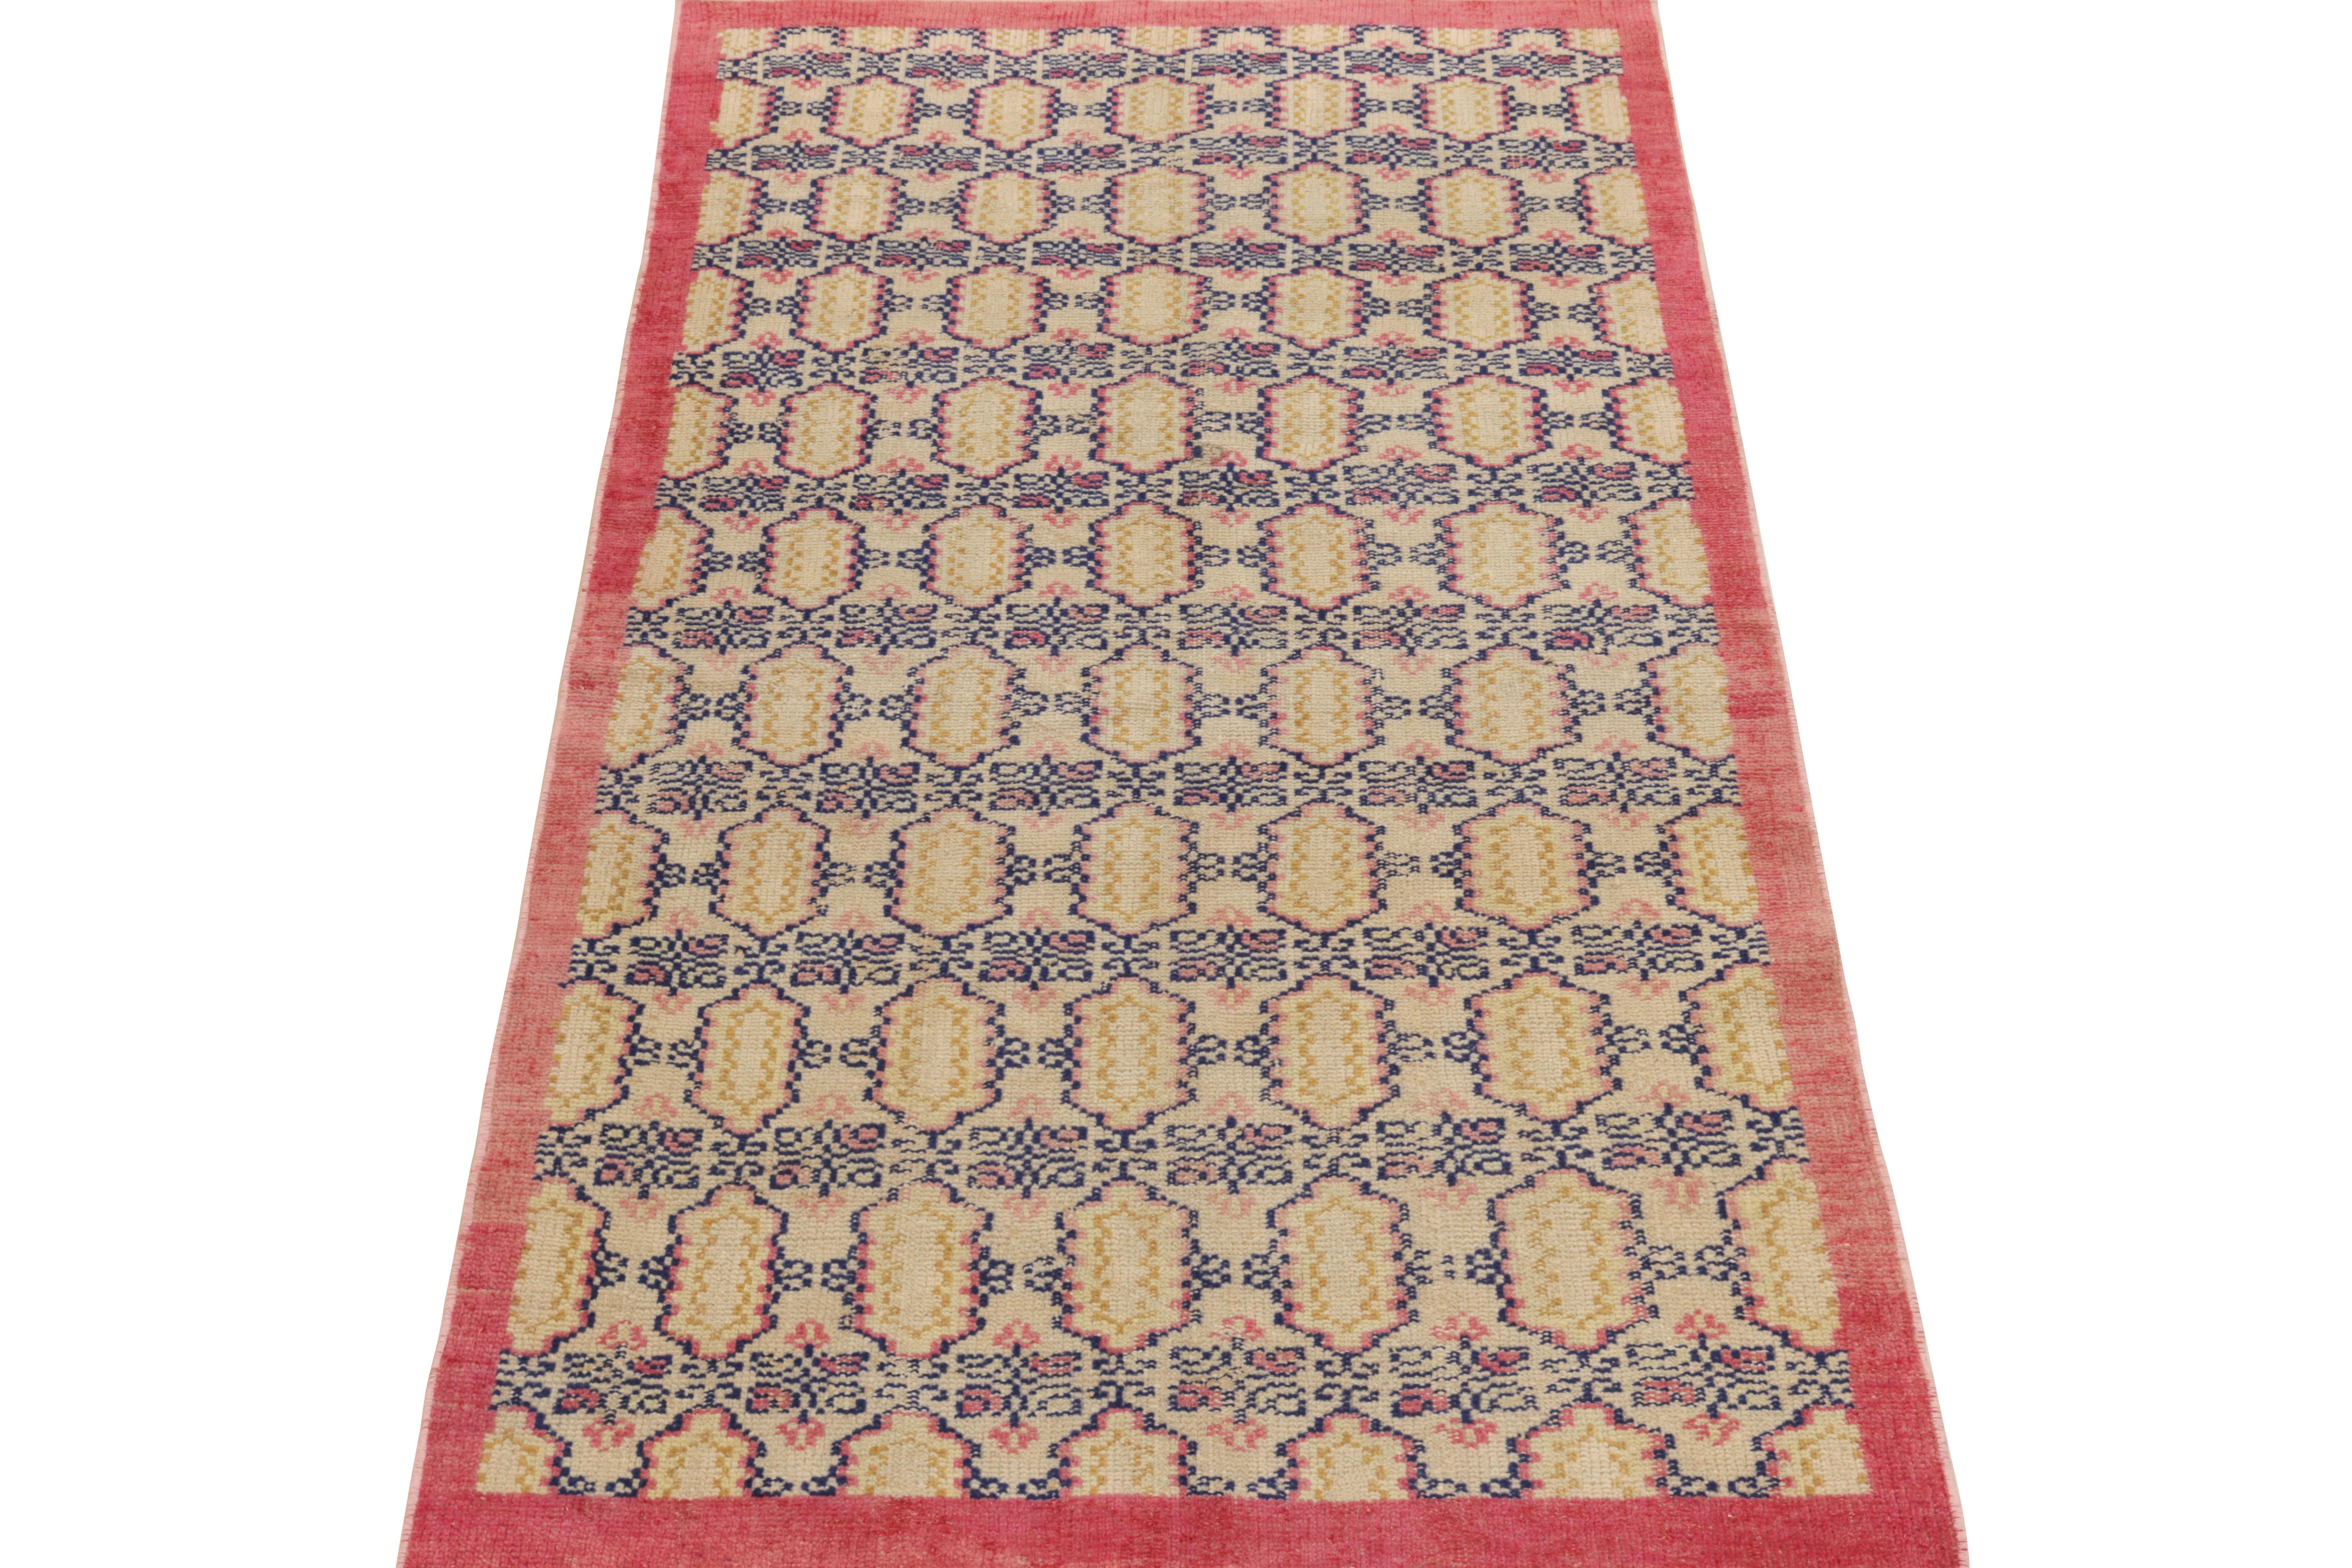 Hand-knotted in wool, a 4x7 distressed vintage rug from our Mid-Century Pasha collection commemorating the works of a bold Mid-Century Turkish artist.

This 1960s style takes an interesting spin with geometric deco sensibilities for exceptional